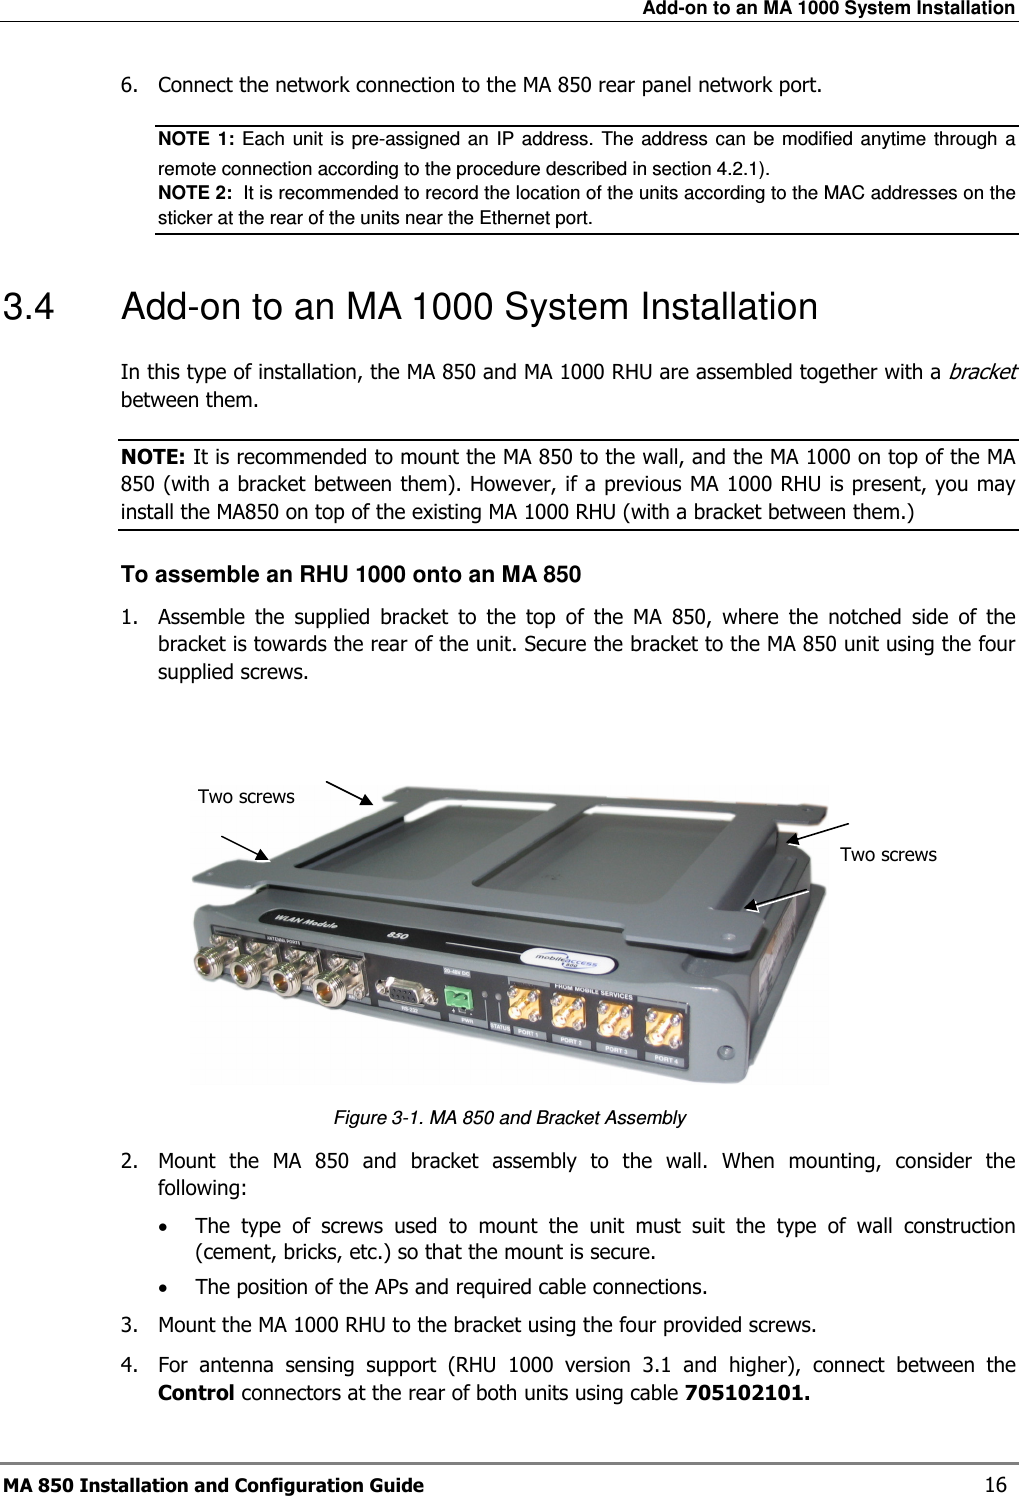 Add-on to an MA 1000 System Installation MA 850 Installation and Configuration Guide    16 6.  Connect the network connection to the MA 850 rear panel network port. NOTE  1:  Each  unit is  pre-assigned an  IP  address.  The address  can  be  modified  anytime  through  a remote connection according to the procedure described in section  4.2.1).   NOTE 2:  It is recommended to record the location of the units according to the MAC addresses on the sticker at the rear of the units near the Ethernet port. 3.4  Add-on to an MA 1000 System Installation In this type of installation, the MA 850 and MA 1000 RHU are assembled together with a bracket between them.  NOTE: It is recommended to mount the MA 850 to the wall, and the MA 1000 on top of the MA 850 (with a bracket between them). However, if a previous MA 1000 RHU is present, you may install the MA850 on top of the existing MA 1000 RHU (with a bracket between them.) To assemble an RHU 1000 onto an MA 850 1.  Assemble  the  supplied  bracket  to  the  top  of  the  MA  850,  where  the  notched  side  of  the bracket is towards the rear of the unit. Secure the bracket to the MA 850 unit using the four supplied screws.    Figure  3-1. MA 850 and Bracket Assembly 2.  Mount  the  MA  850  and  bracket  assembly  to  the  wall.  When  mounting,  consider  the following: • The  type  of  screws  used  to  mount  the  unit  must  suit  the  type  of  wall  construction (cement, bricks, etc.) so that the mount is secure. • The position of the APs and required cable connections. 3.  Mount the MA 1000 RHU to the bracket using the four provided screws.  4.  For  antenna  sensing  support  (RHU  1000  version  3.1  and  higher),  connect  between  the Control connectors at the rear of both units using cable 705102101. Two screws  Two screws  